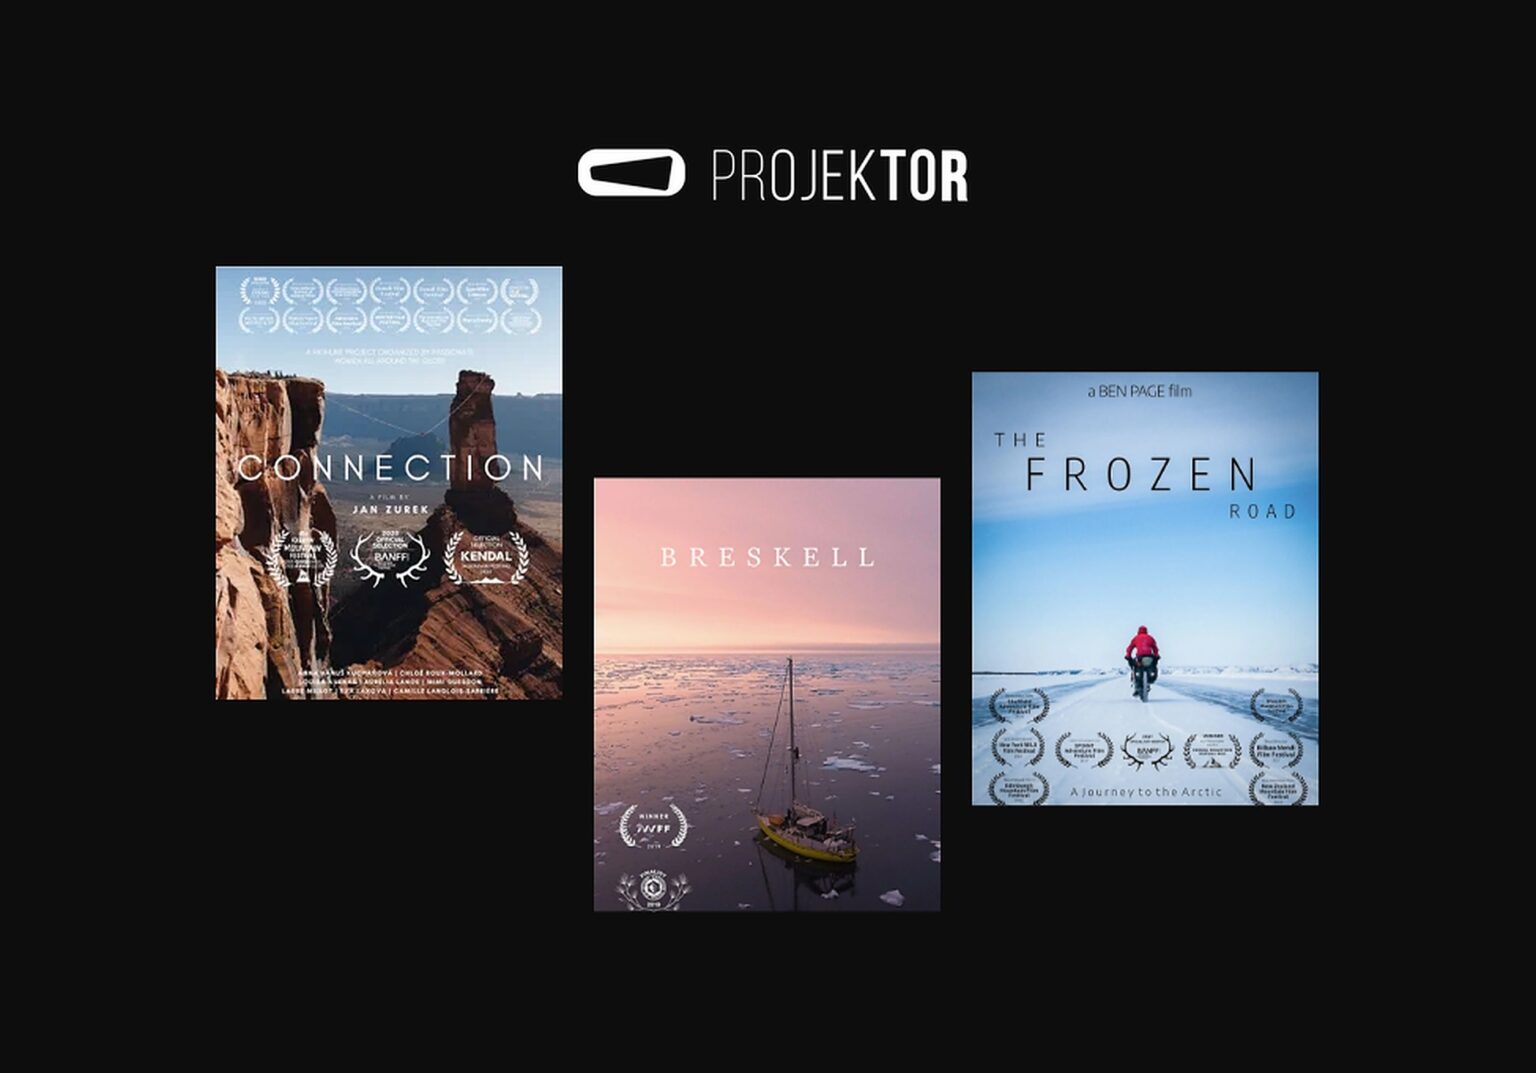 Joshua Jackson's Liquid Media Group has just announced the Projektor Platform to get aspiring independent filmmakers on their feet. Here's all we know!